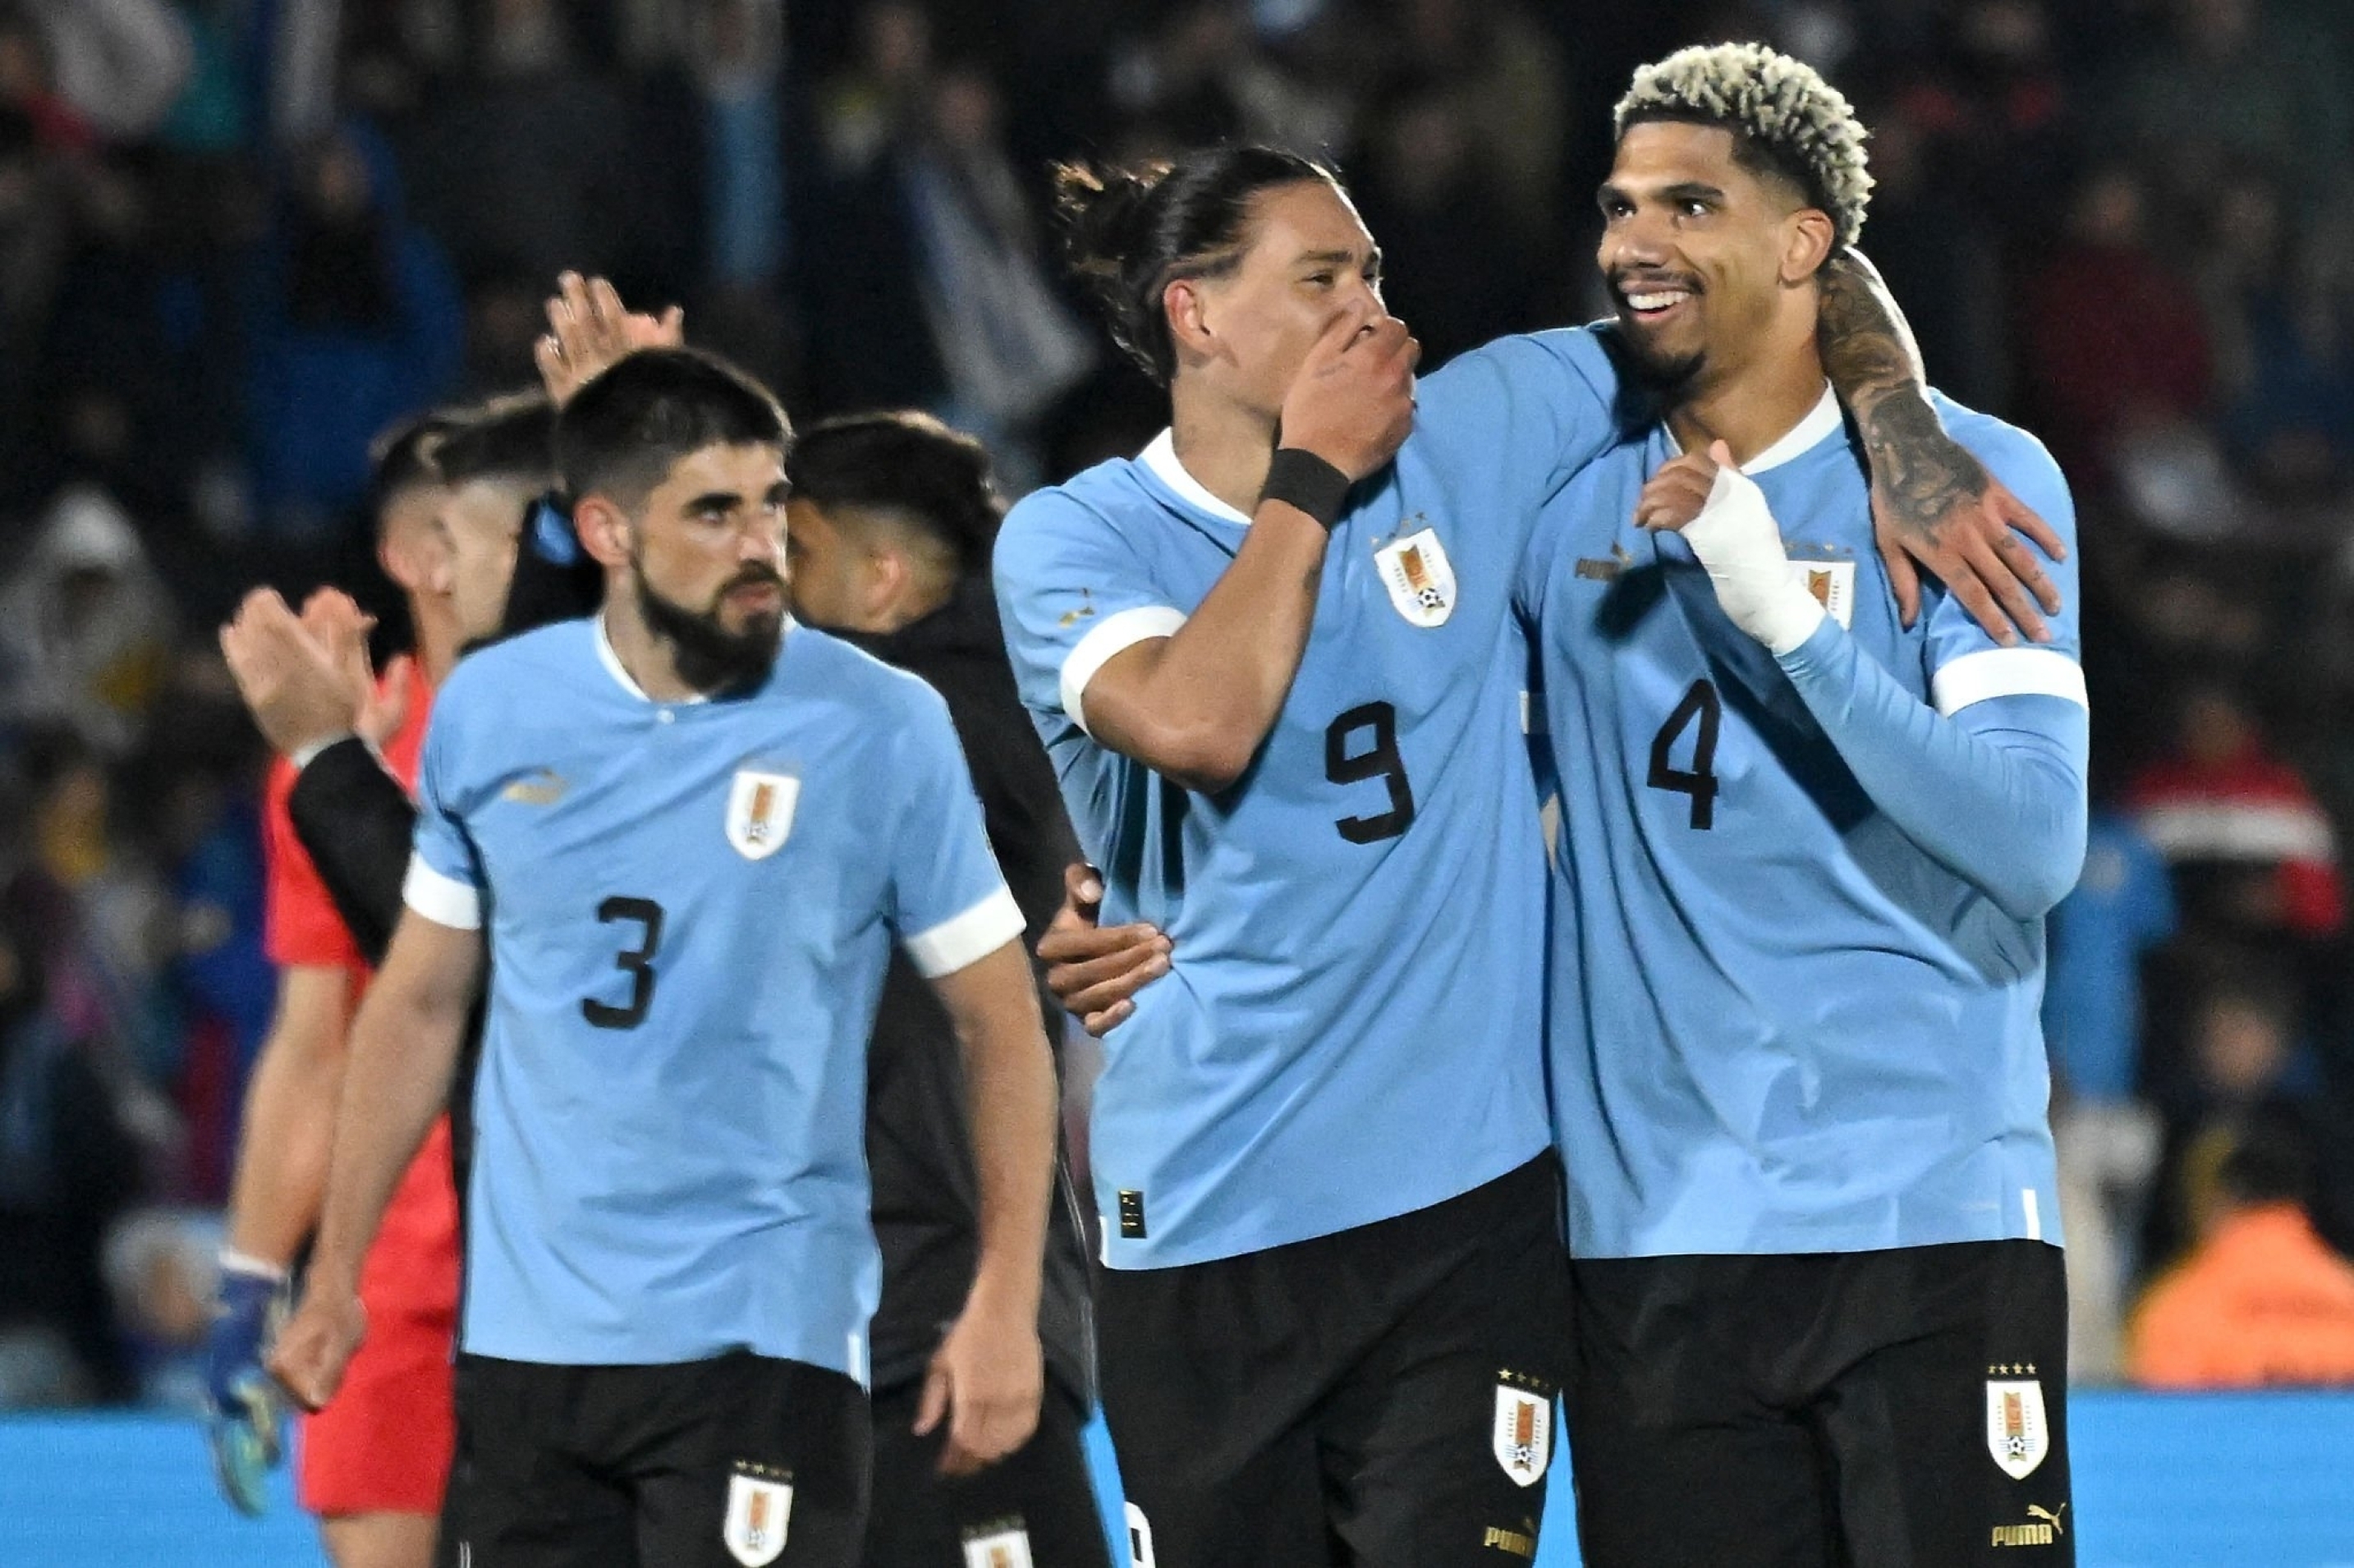 Argentina vs Uruguay - ARG vs URU - Las Albicelestes will be determined to extend 4-game 100% winning run in World Cup Qualifiers matches